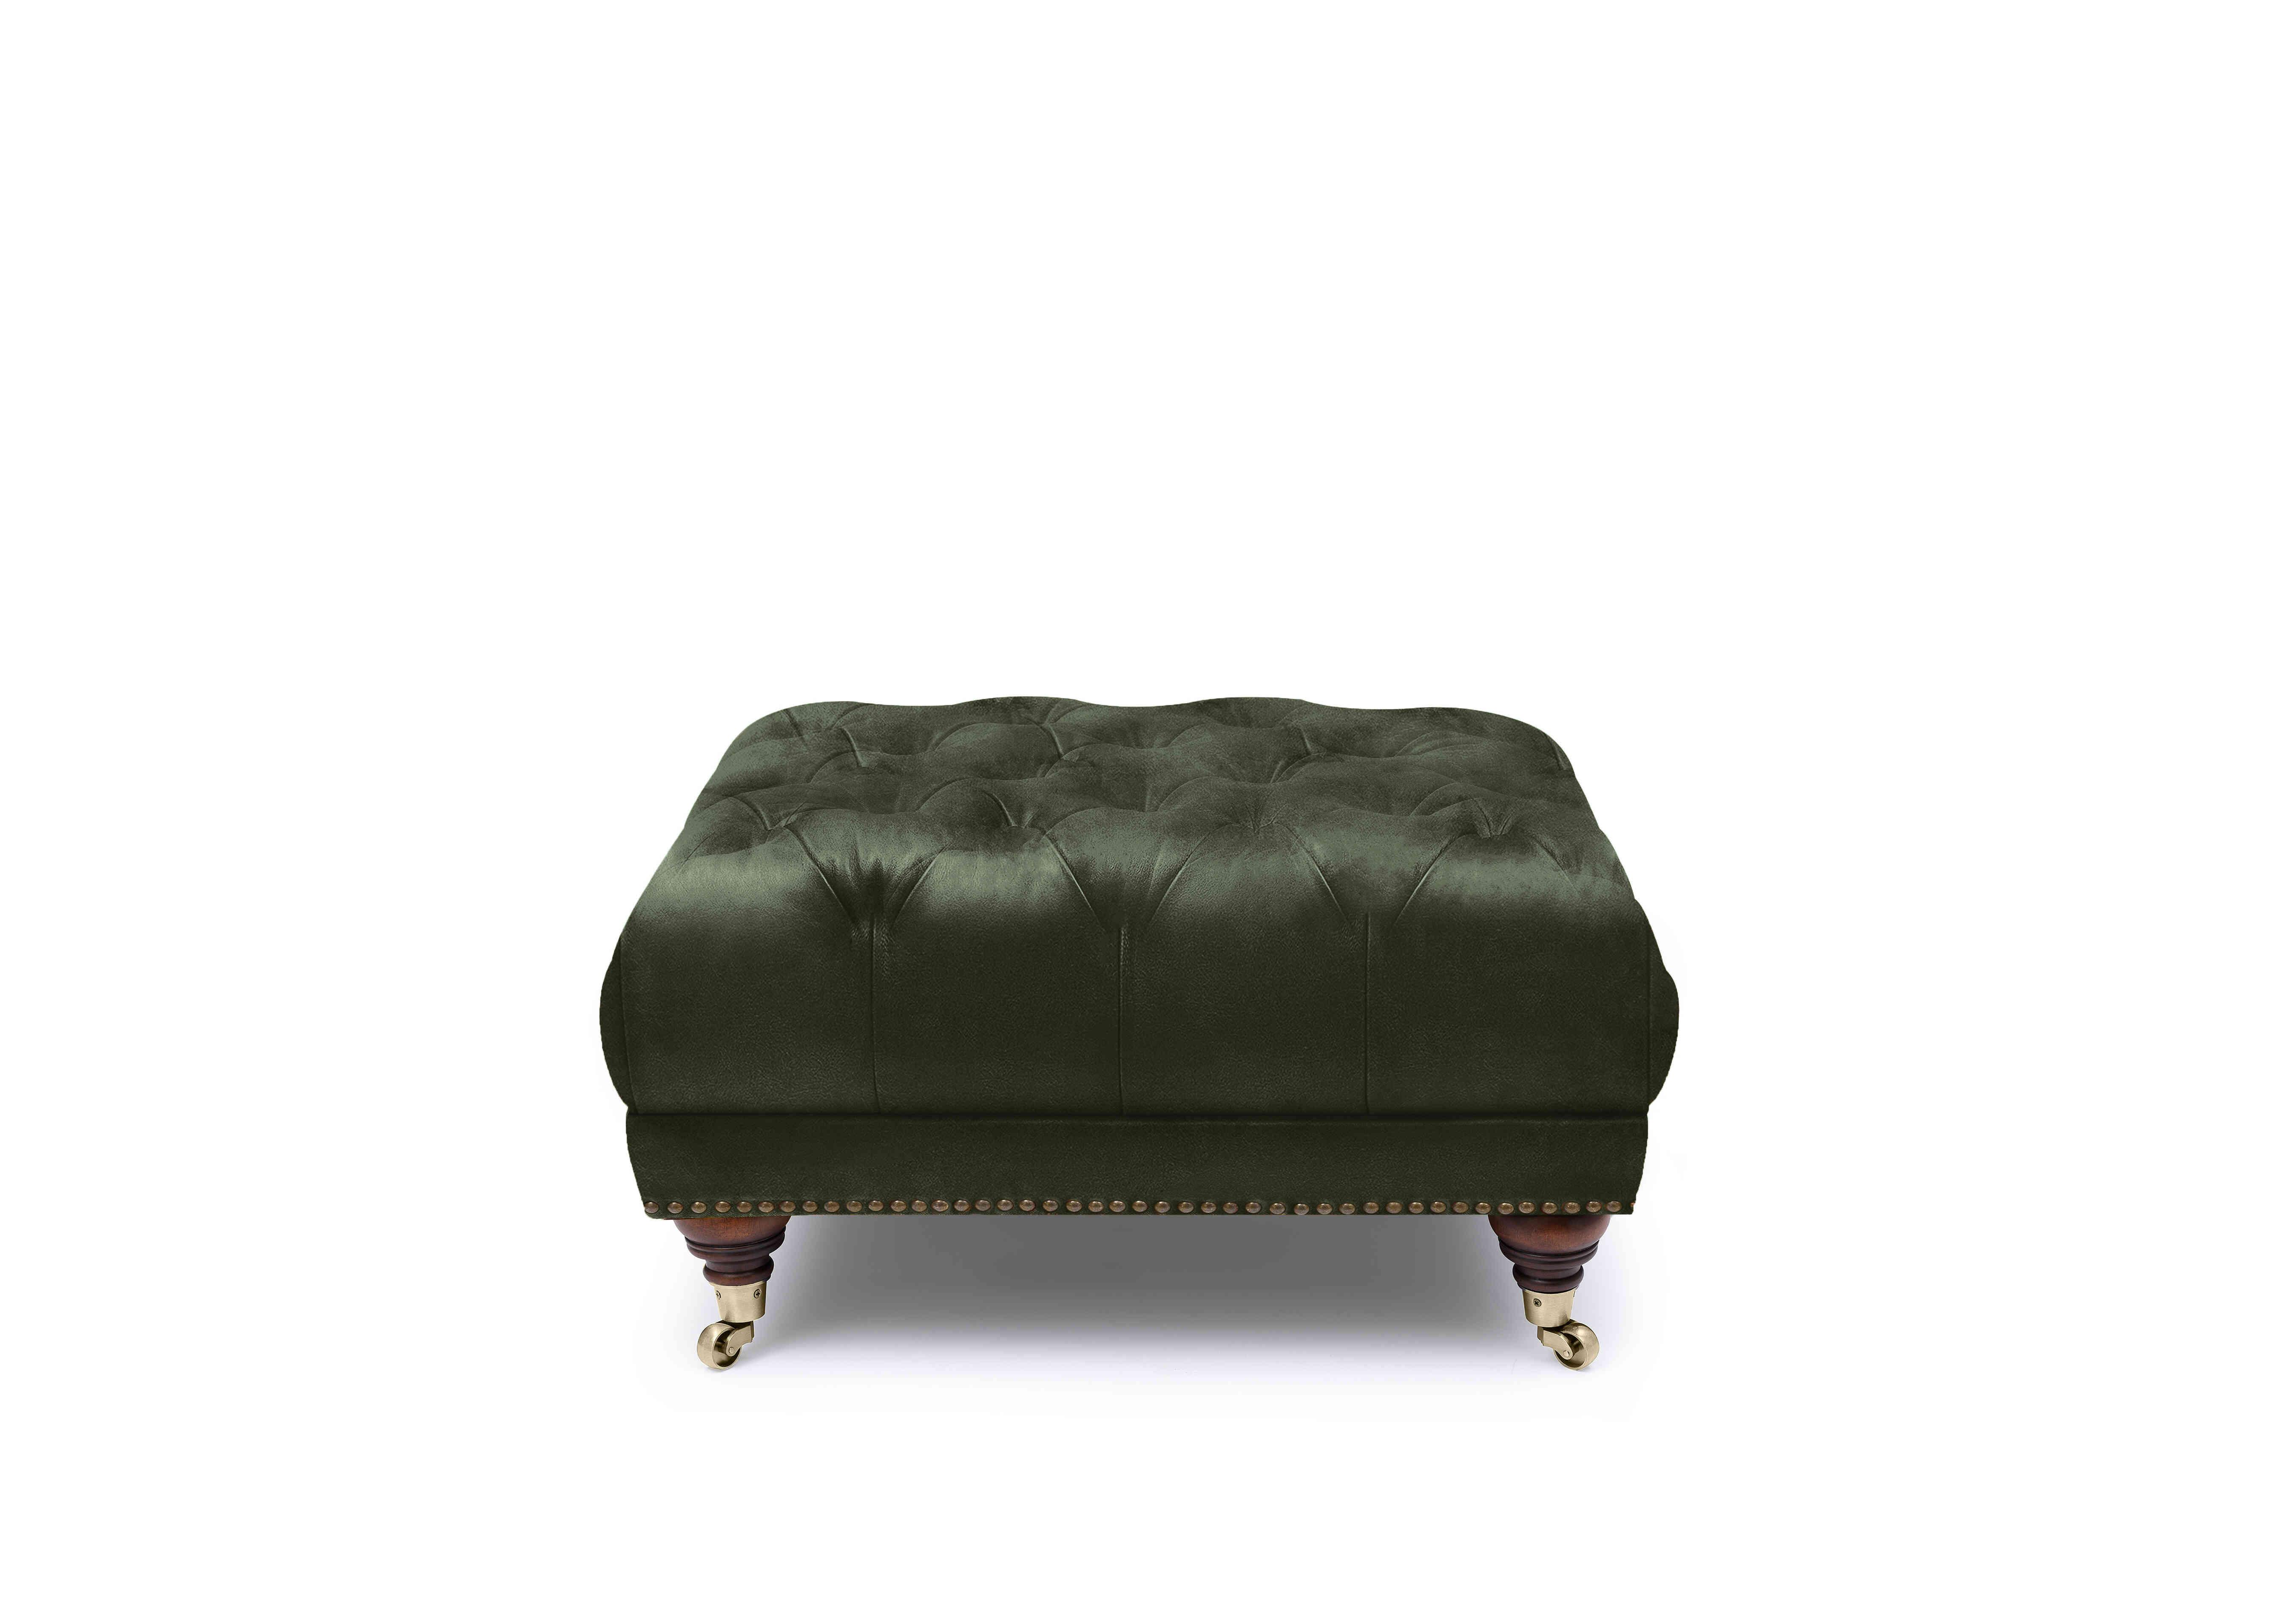 Shackleton Leather Square Footstool with Castors in X3y1-1965ls Emerald on Furniture Village